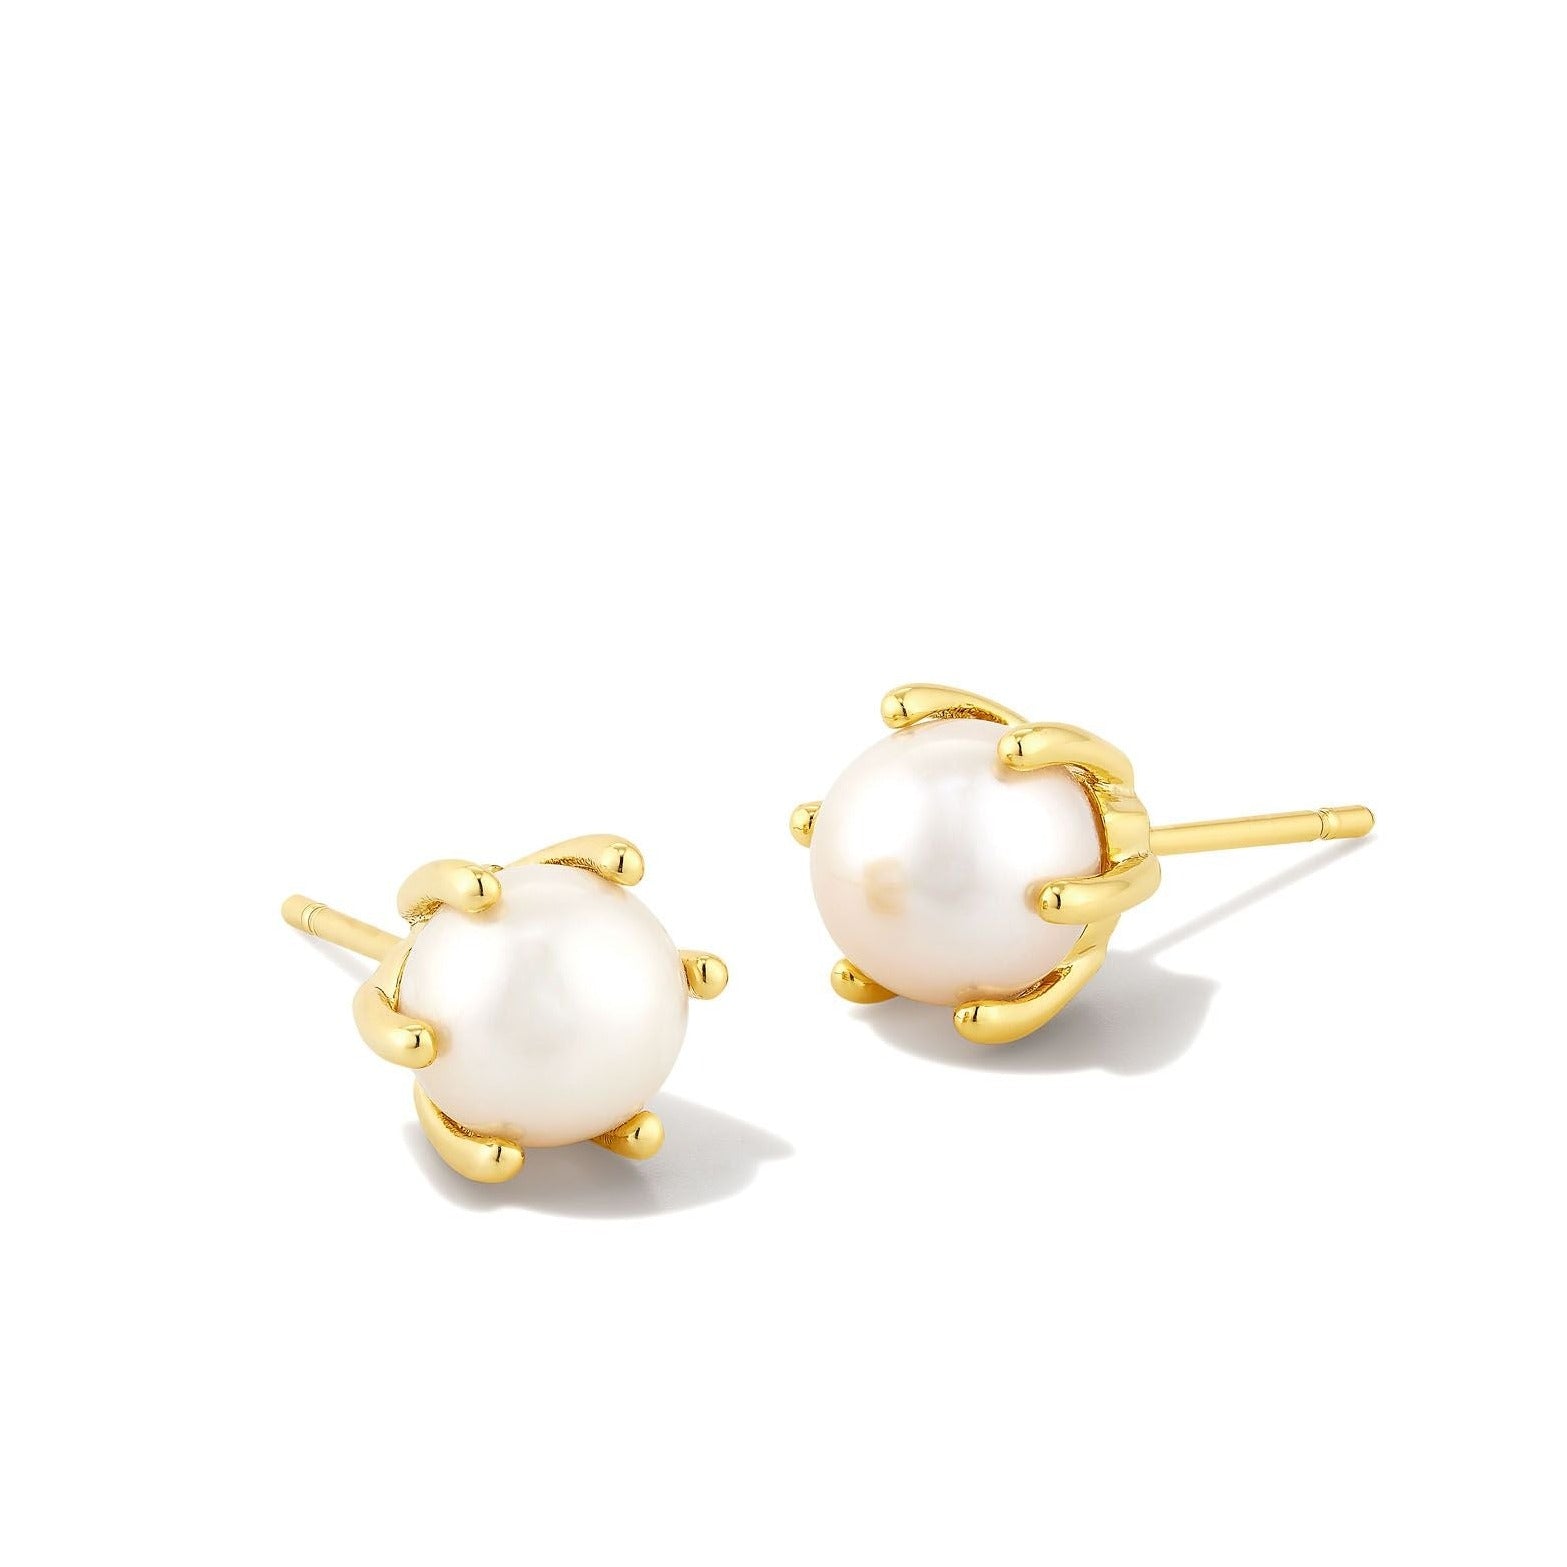 Kendra Scott | Ashton Gold Pearl Stud Earrings - Giddy Up Glamour Boutique